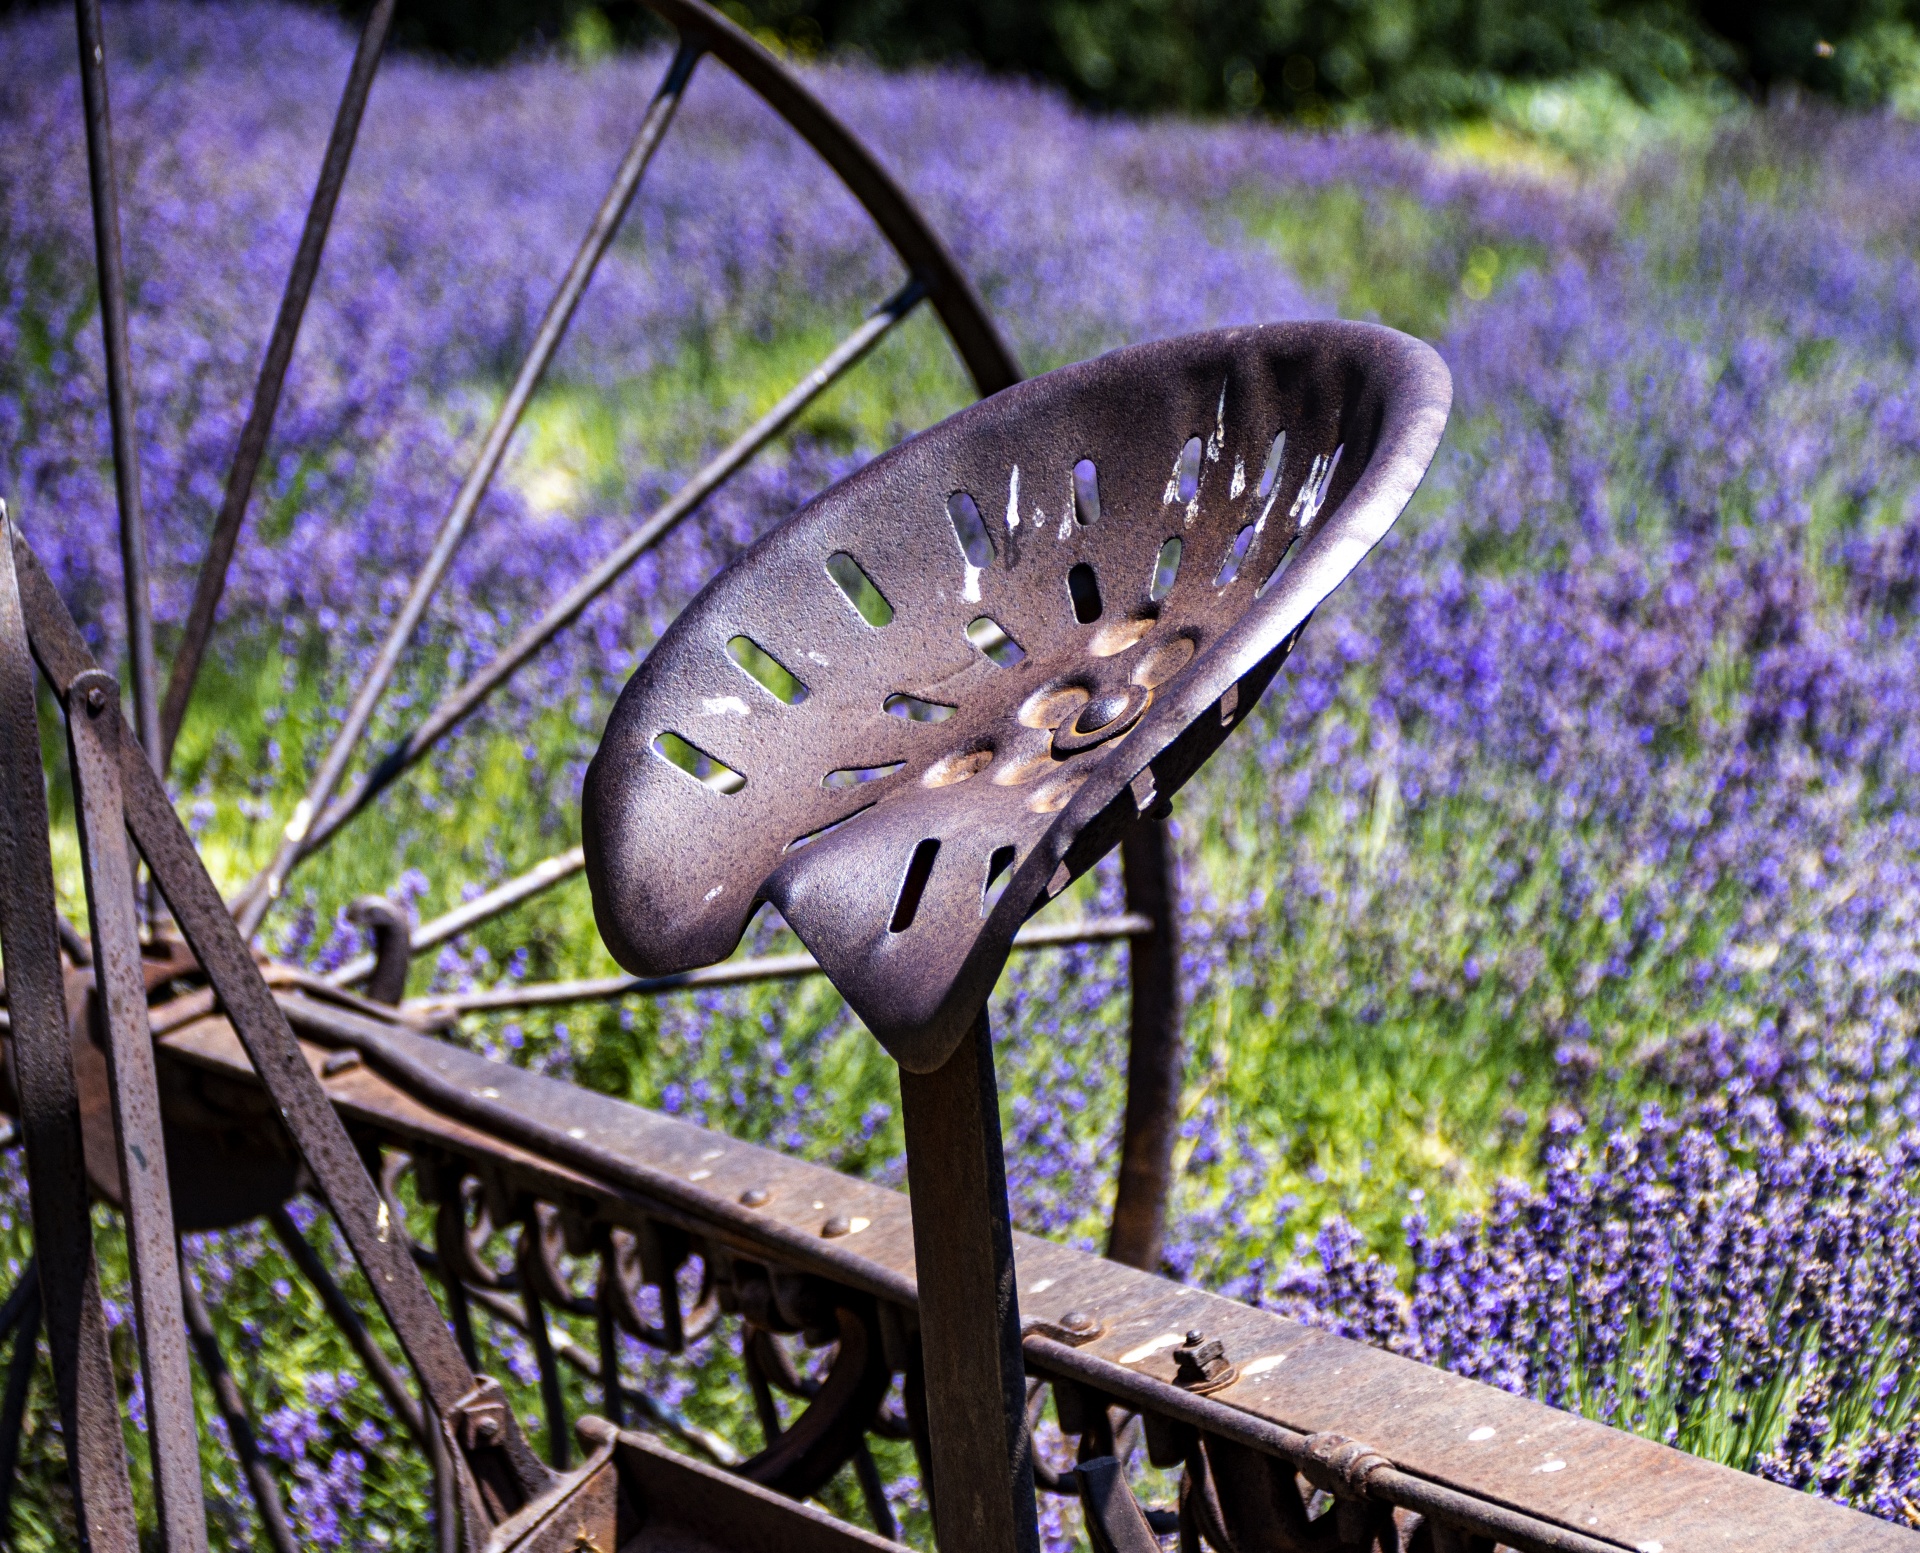 lavender between the growing around an old piece of the seat of a rusty old piece of farming equipment